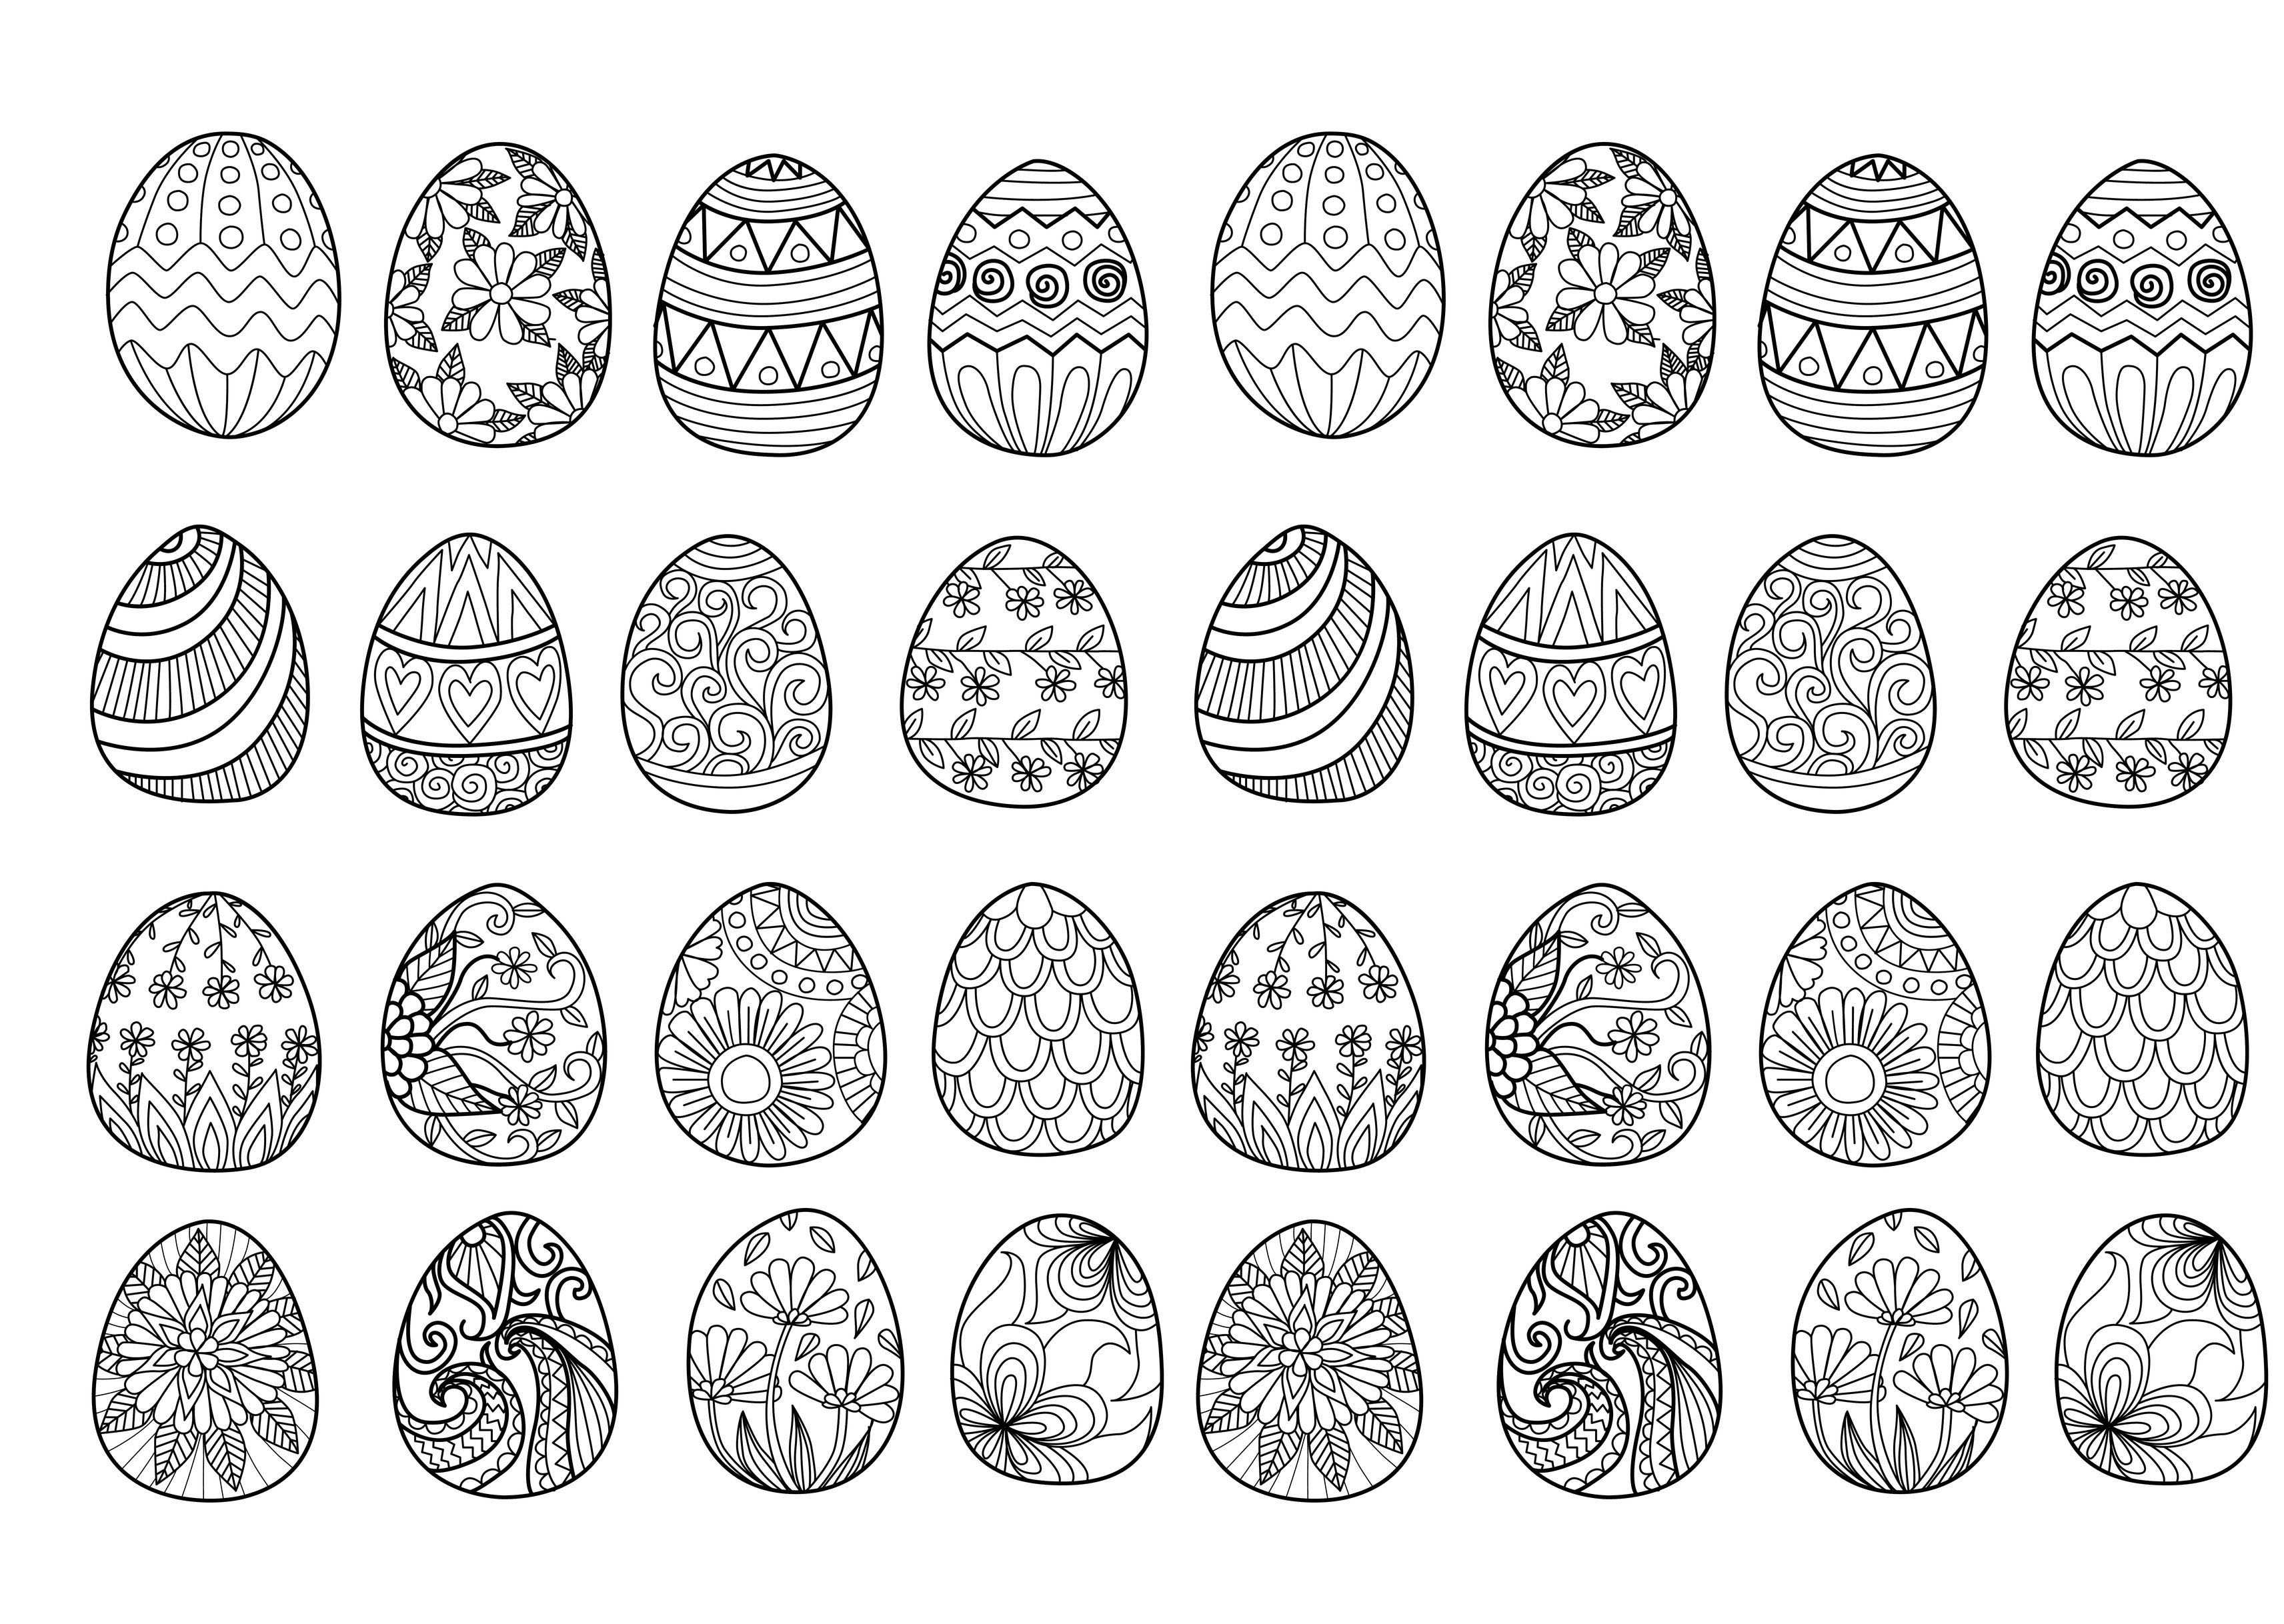 Coloring Pages For Adults Easter Easter Coloring Pages For Adults